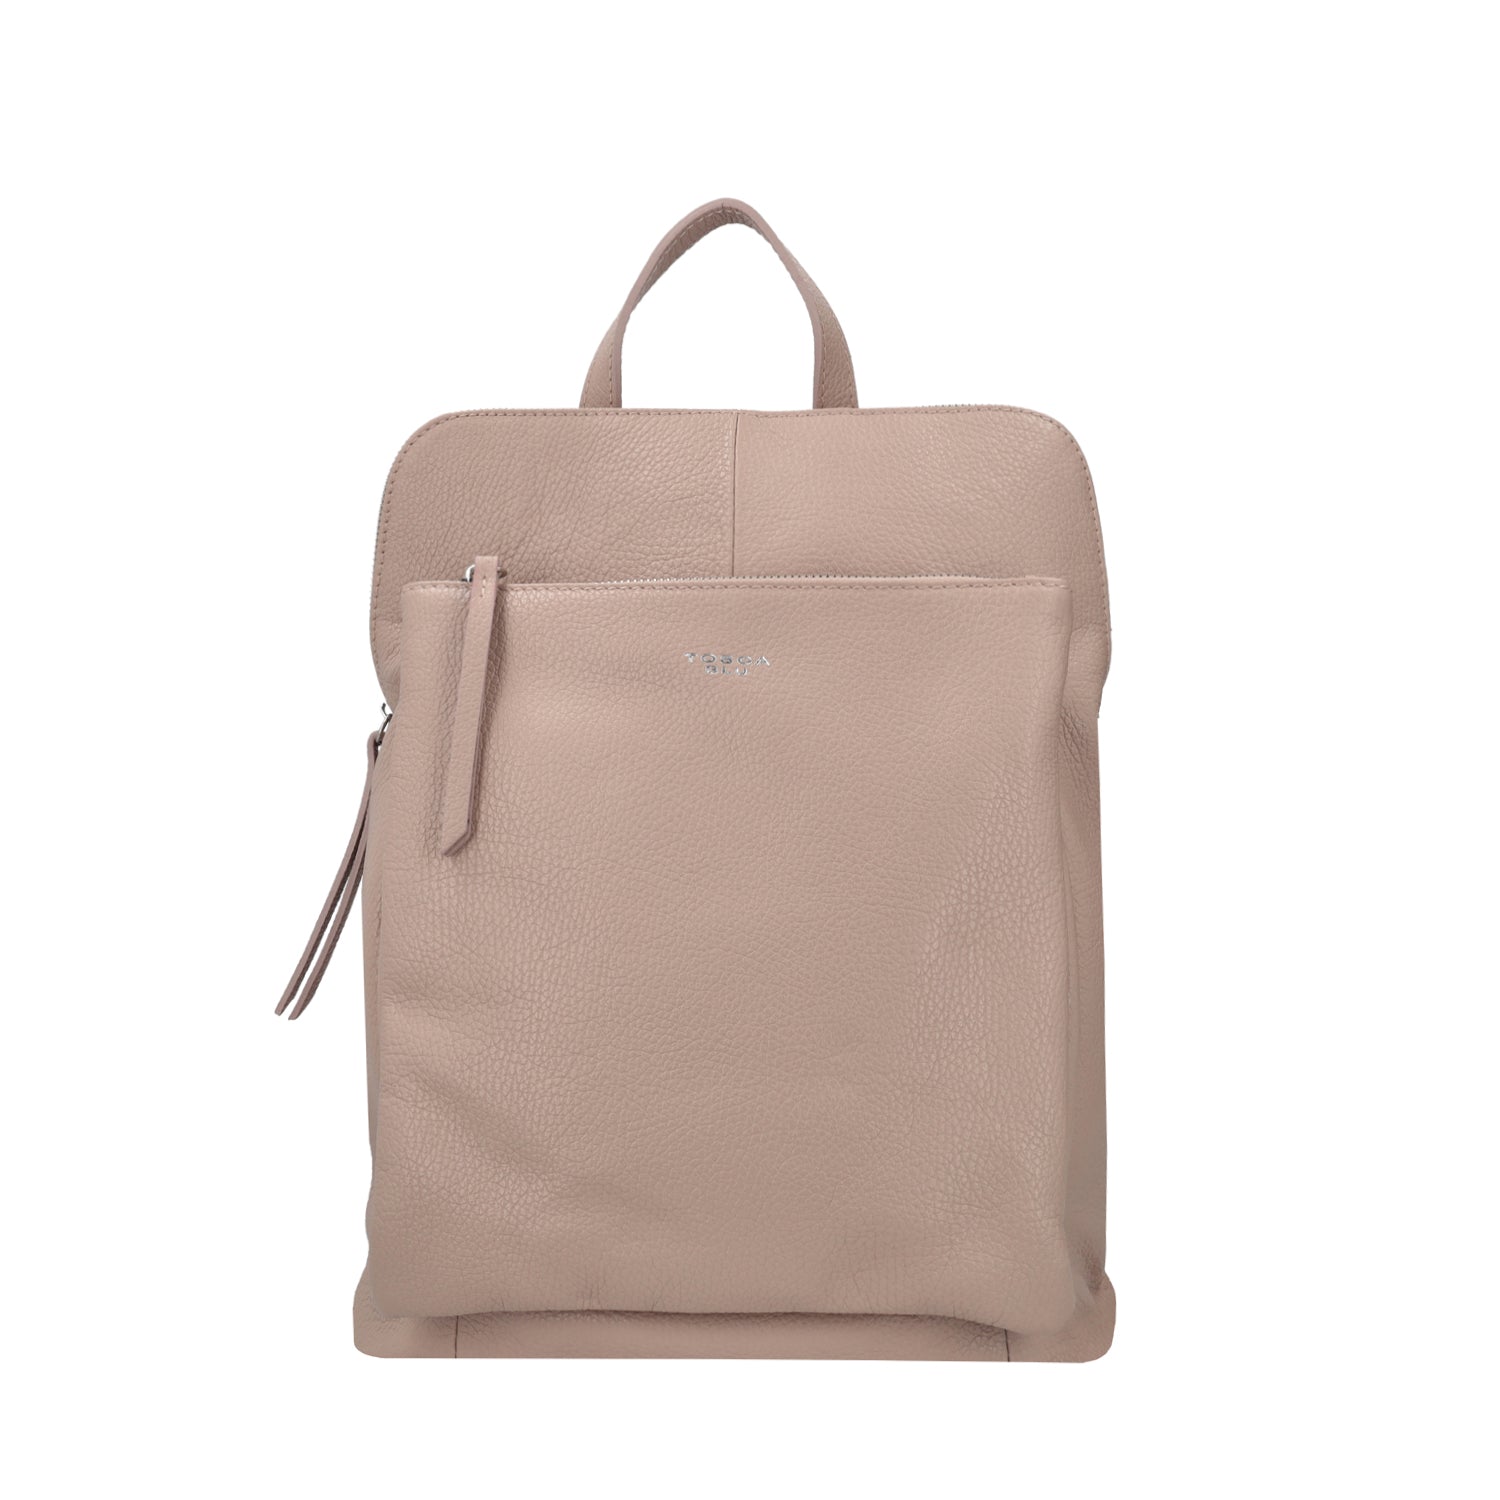 POWDER-COLORED LEATHER BACKPACK WITH ZIPPER CLOSURE